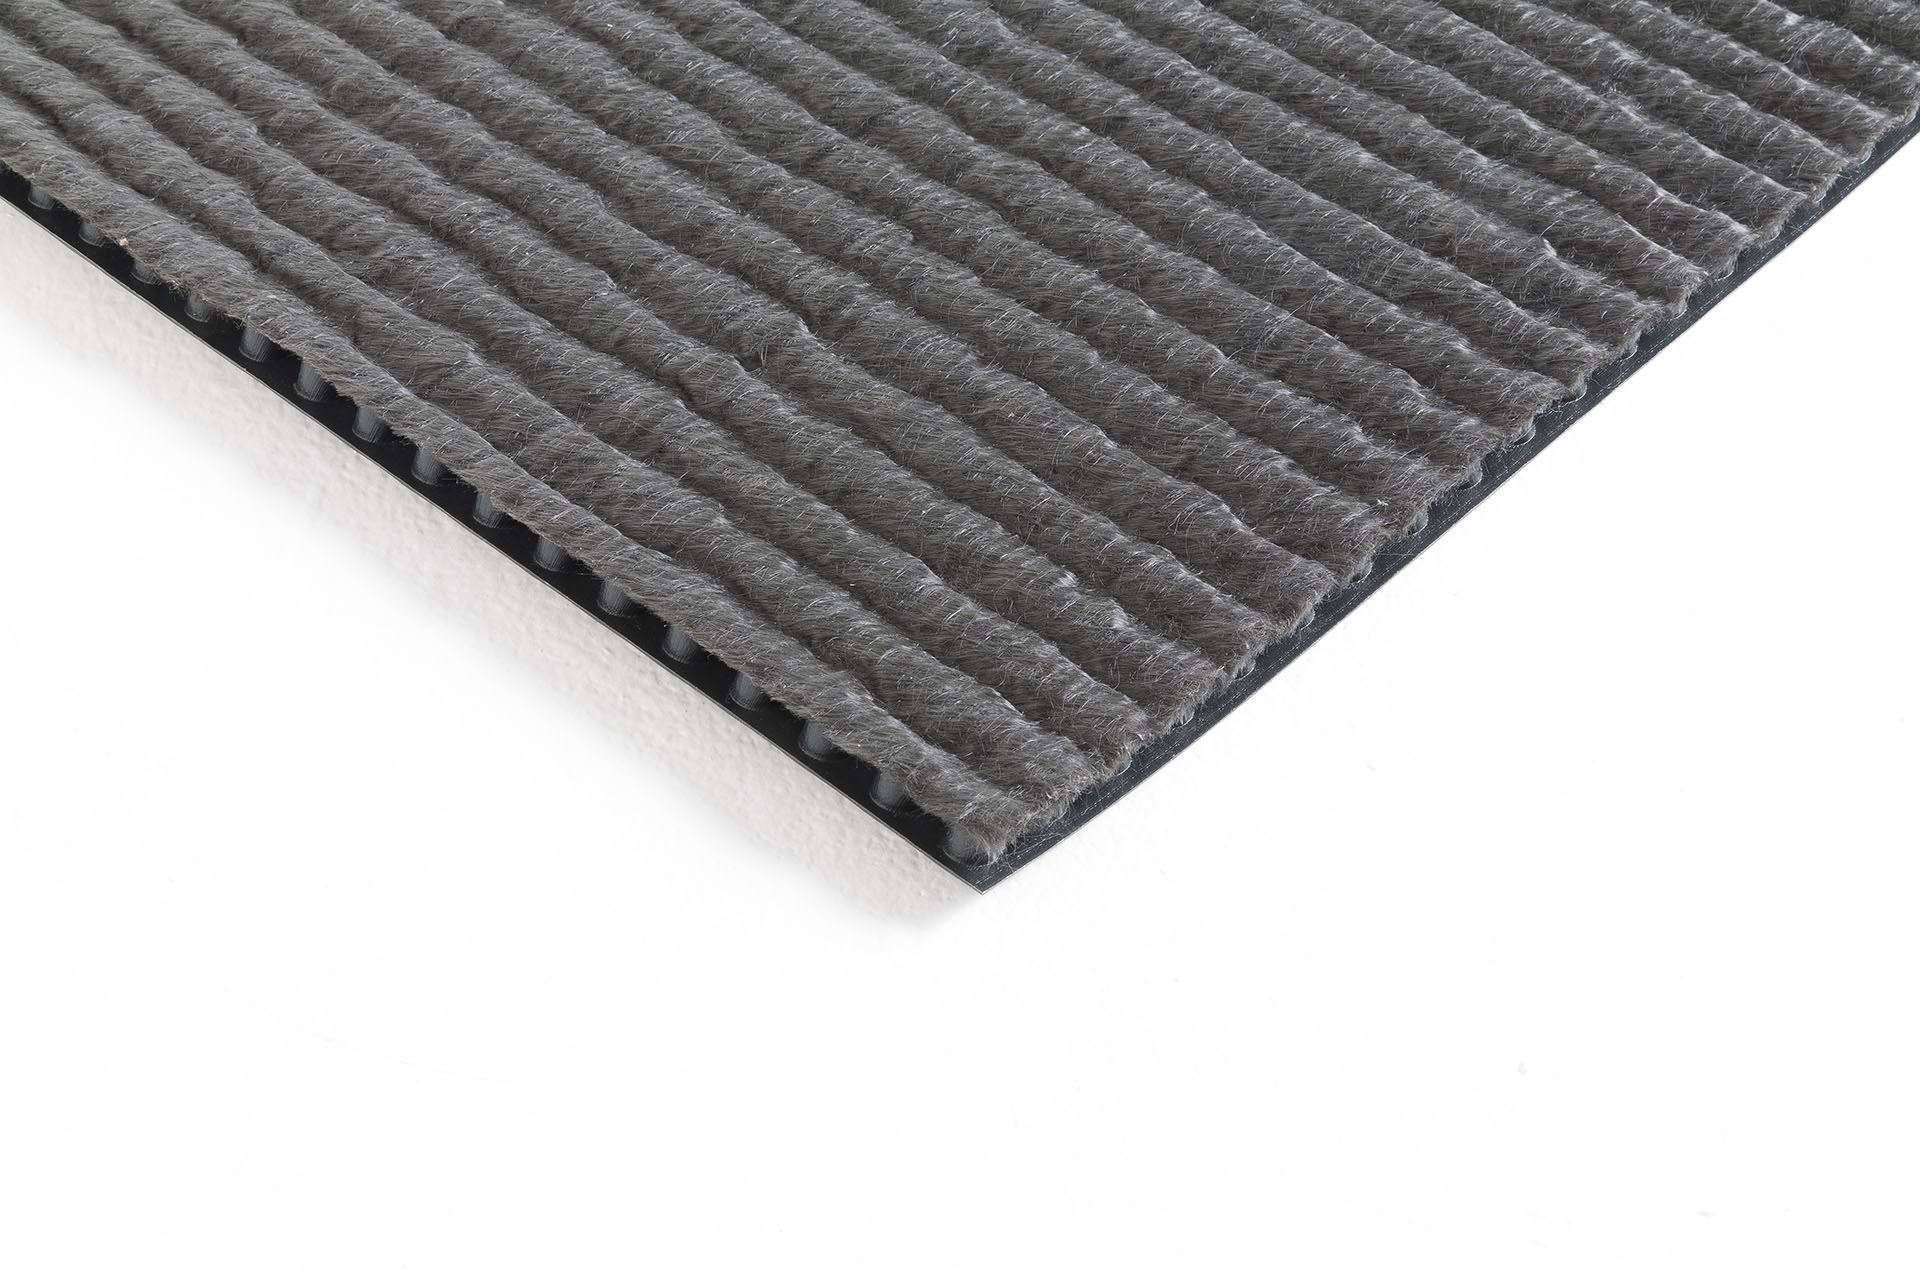 HDPE studded membrane, 10mm thick, with one nonwoven textile